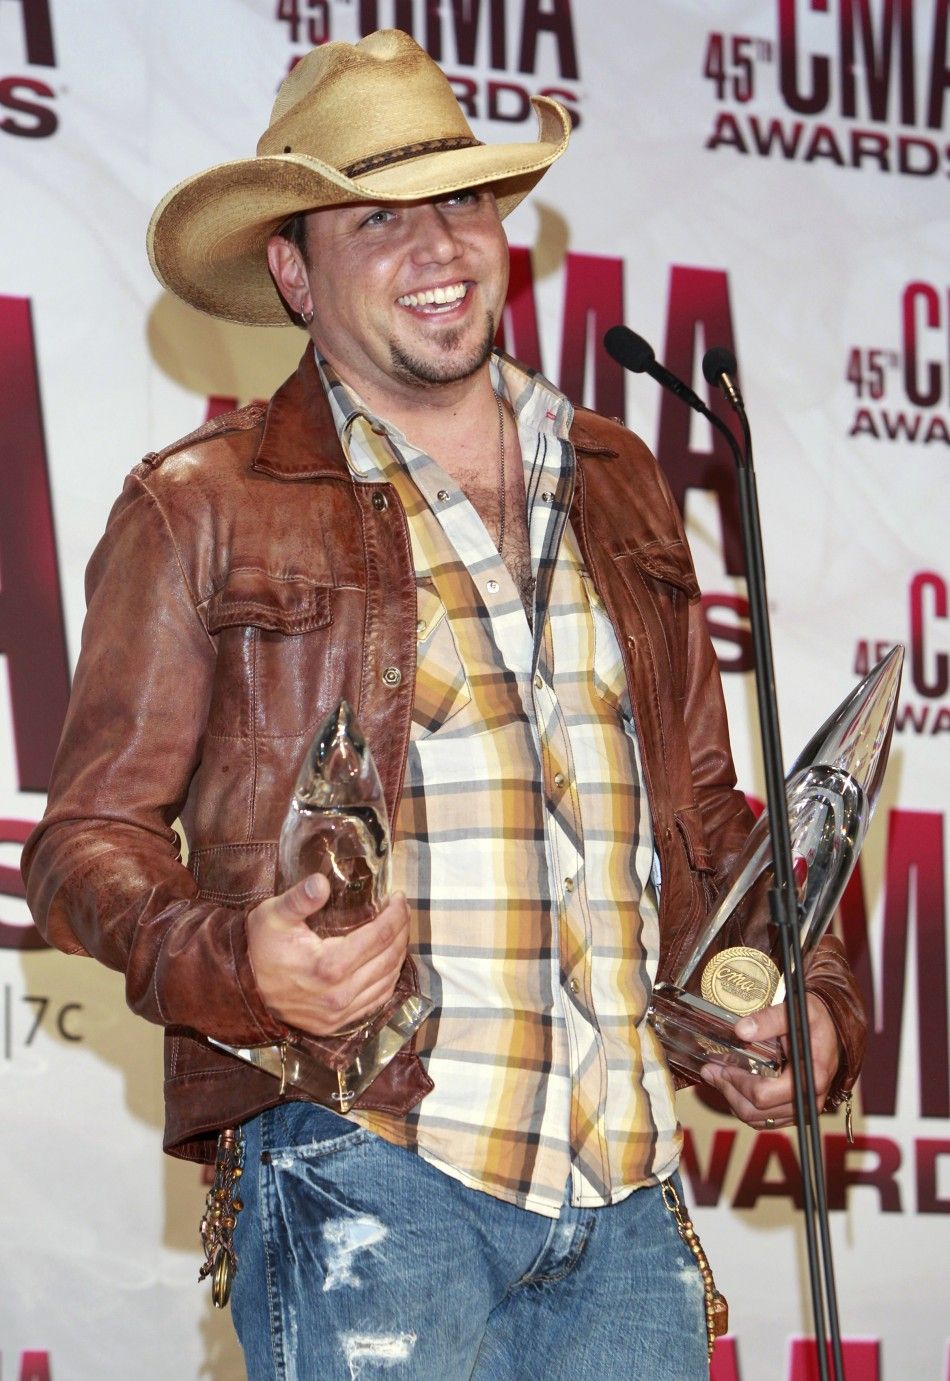  Jason Aldean poses with his awards backstage at the 45th Country Music Association Awards in Nashville